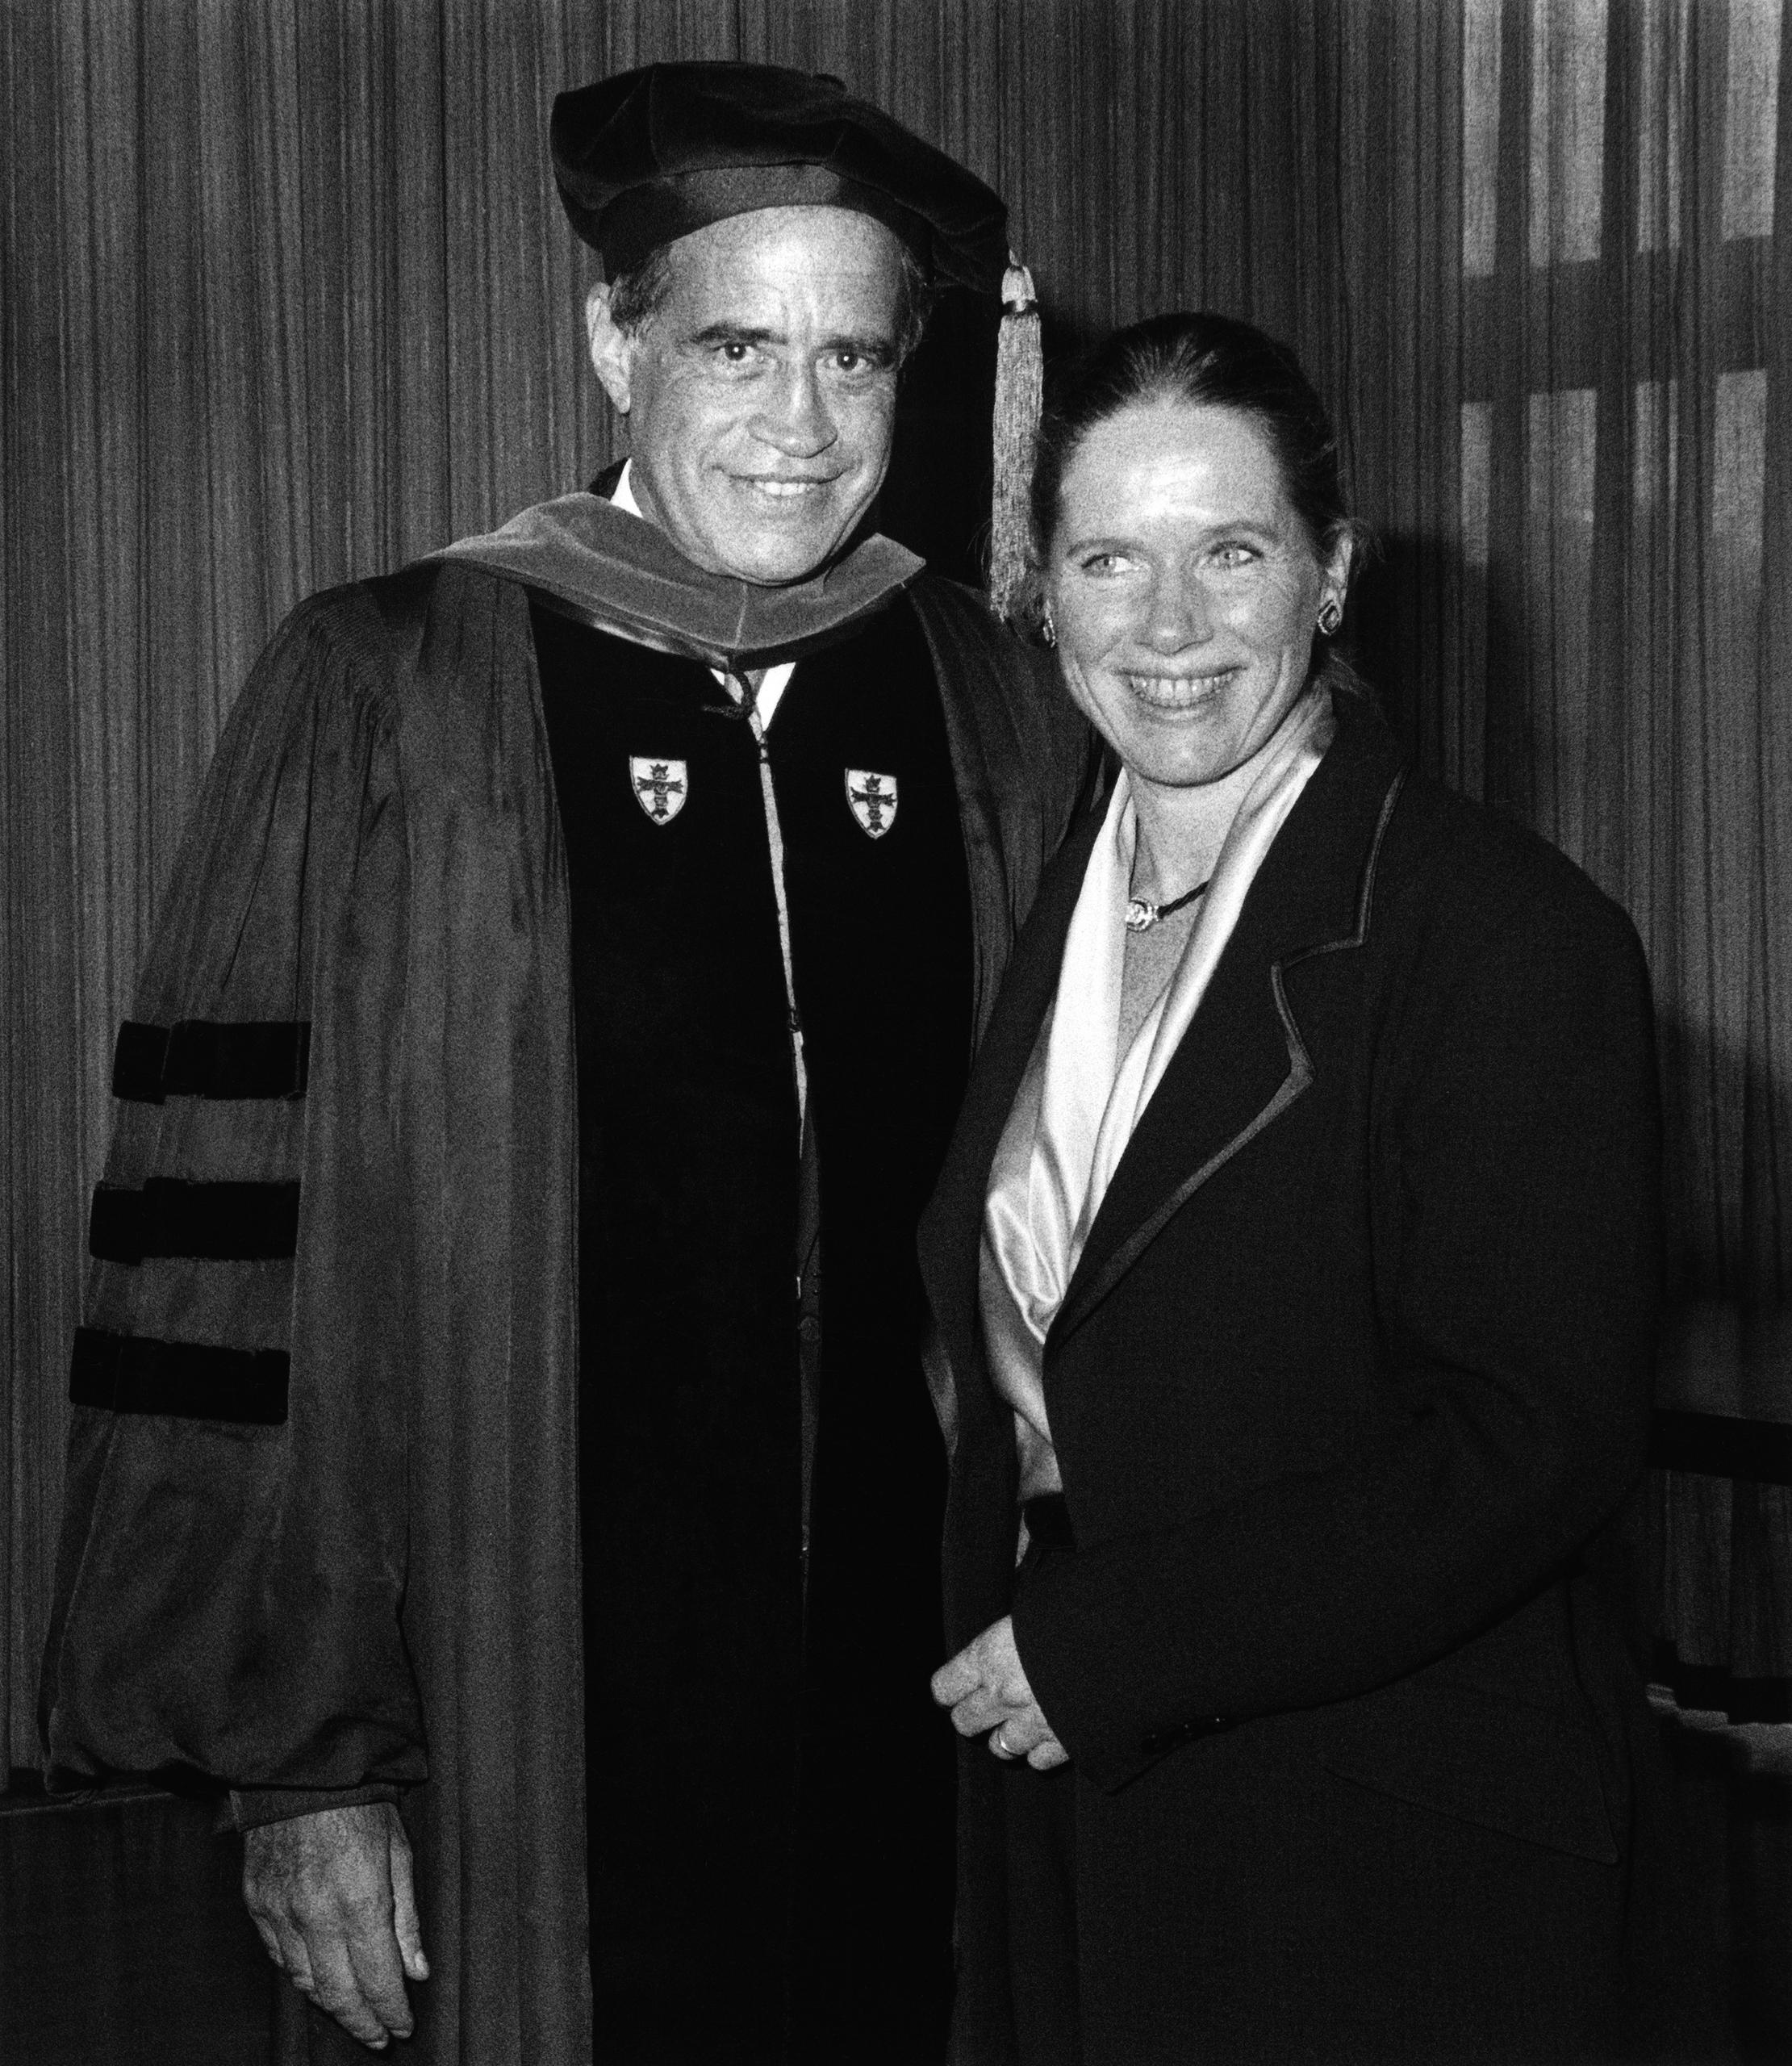 Arthur Cohn receives a honorary doctorate from Boston University, here with Liv Ullmann